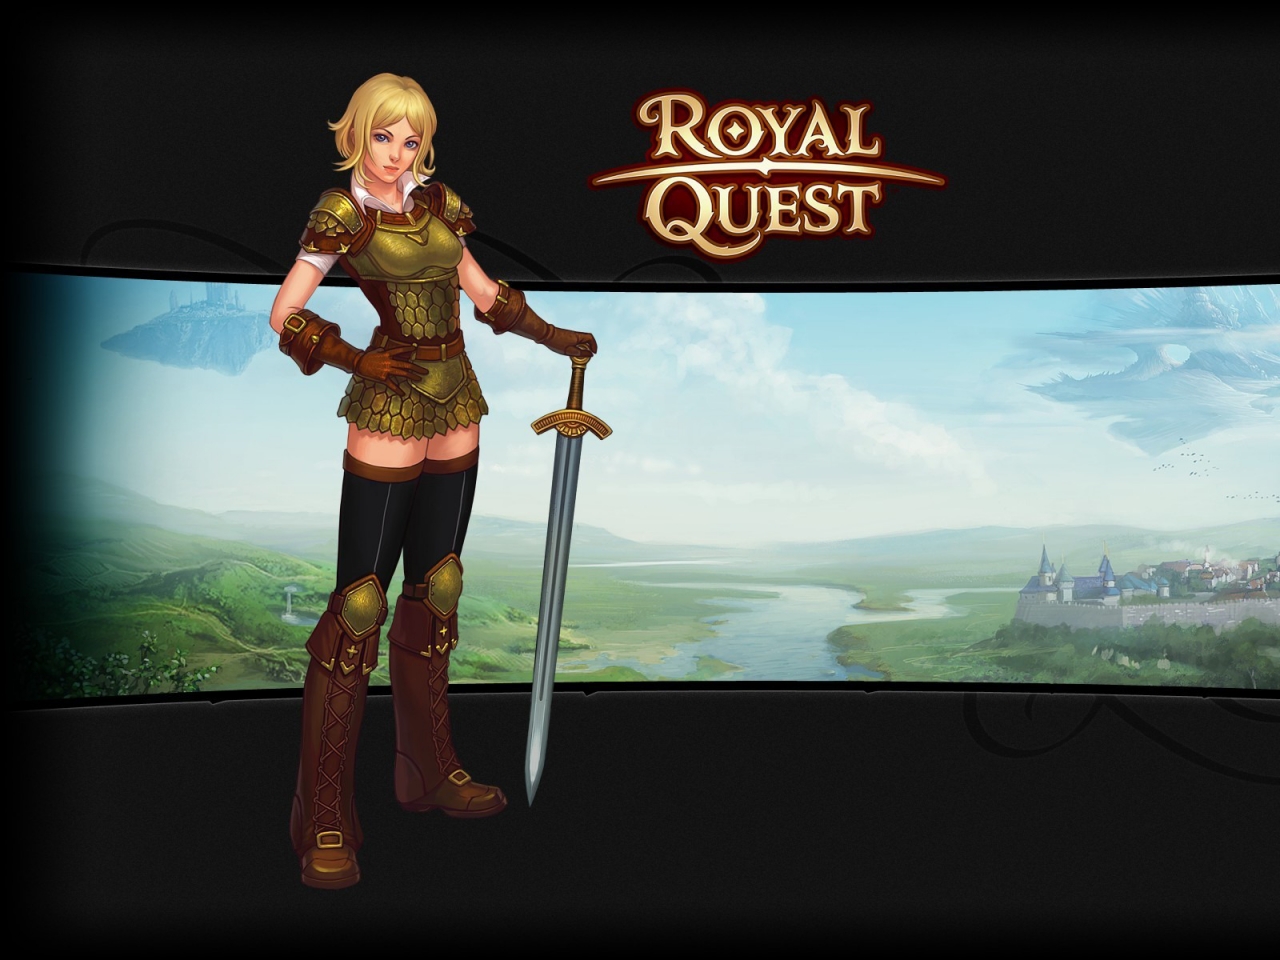 Royal Quest for 1280 x 960 resolution